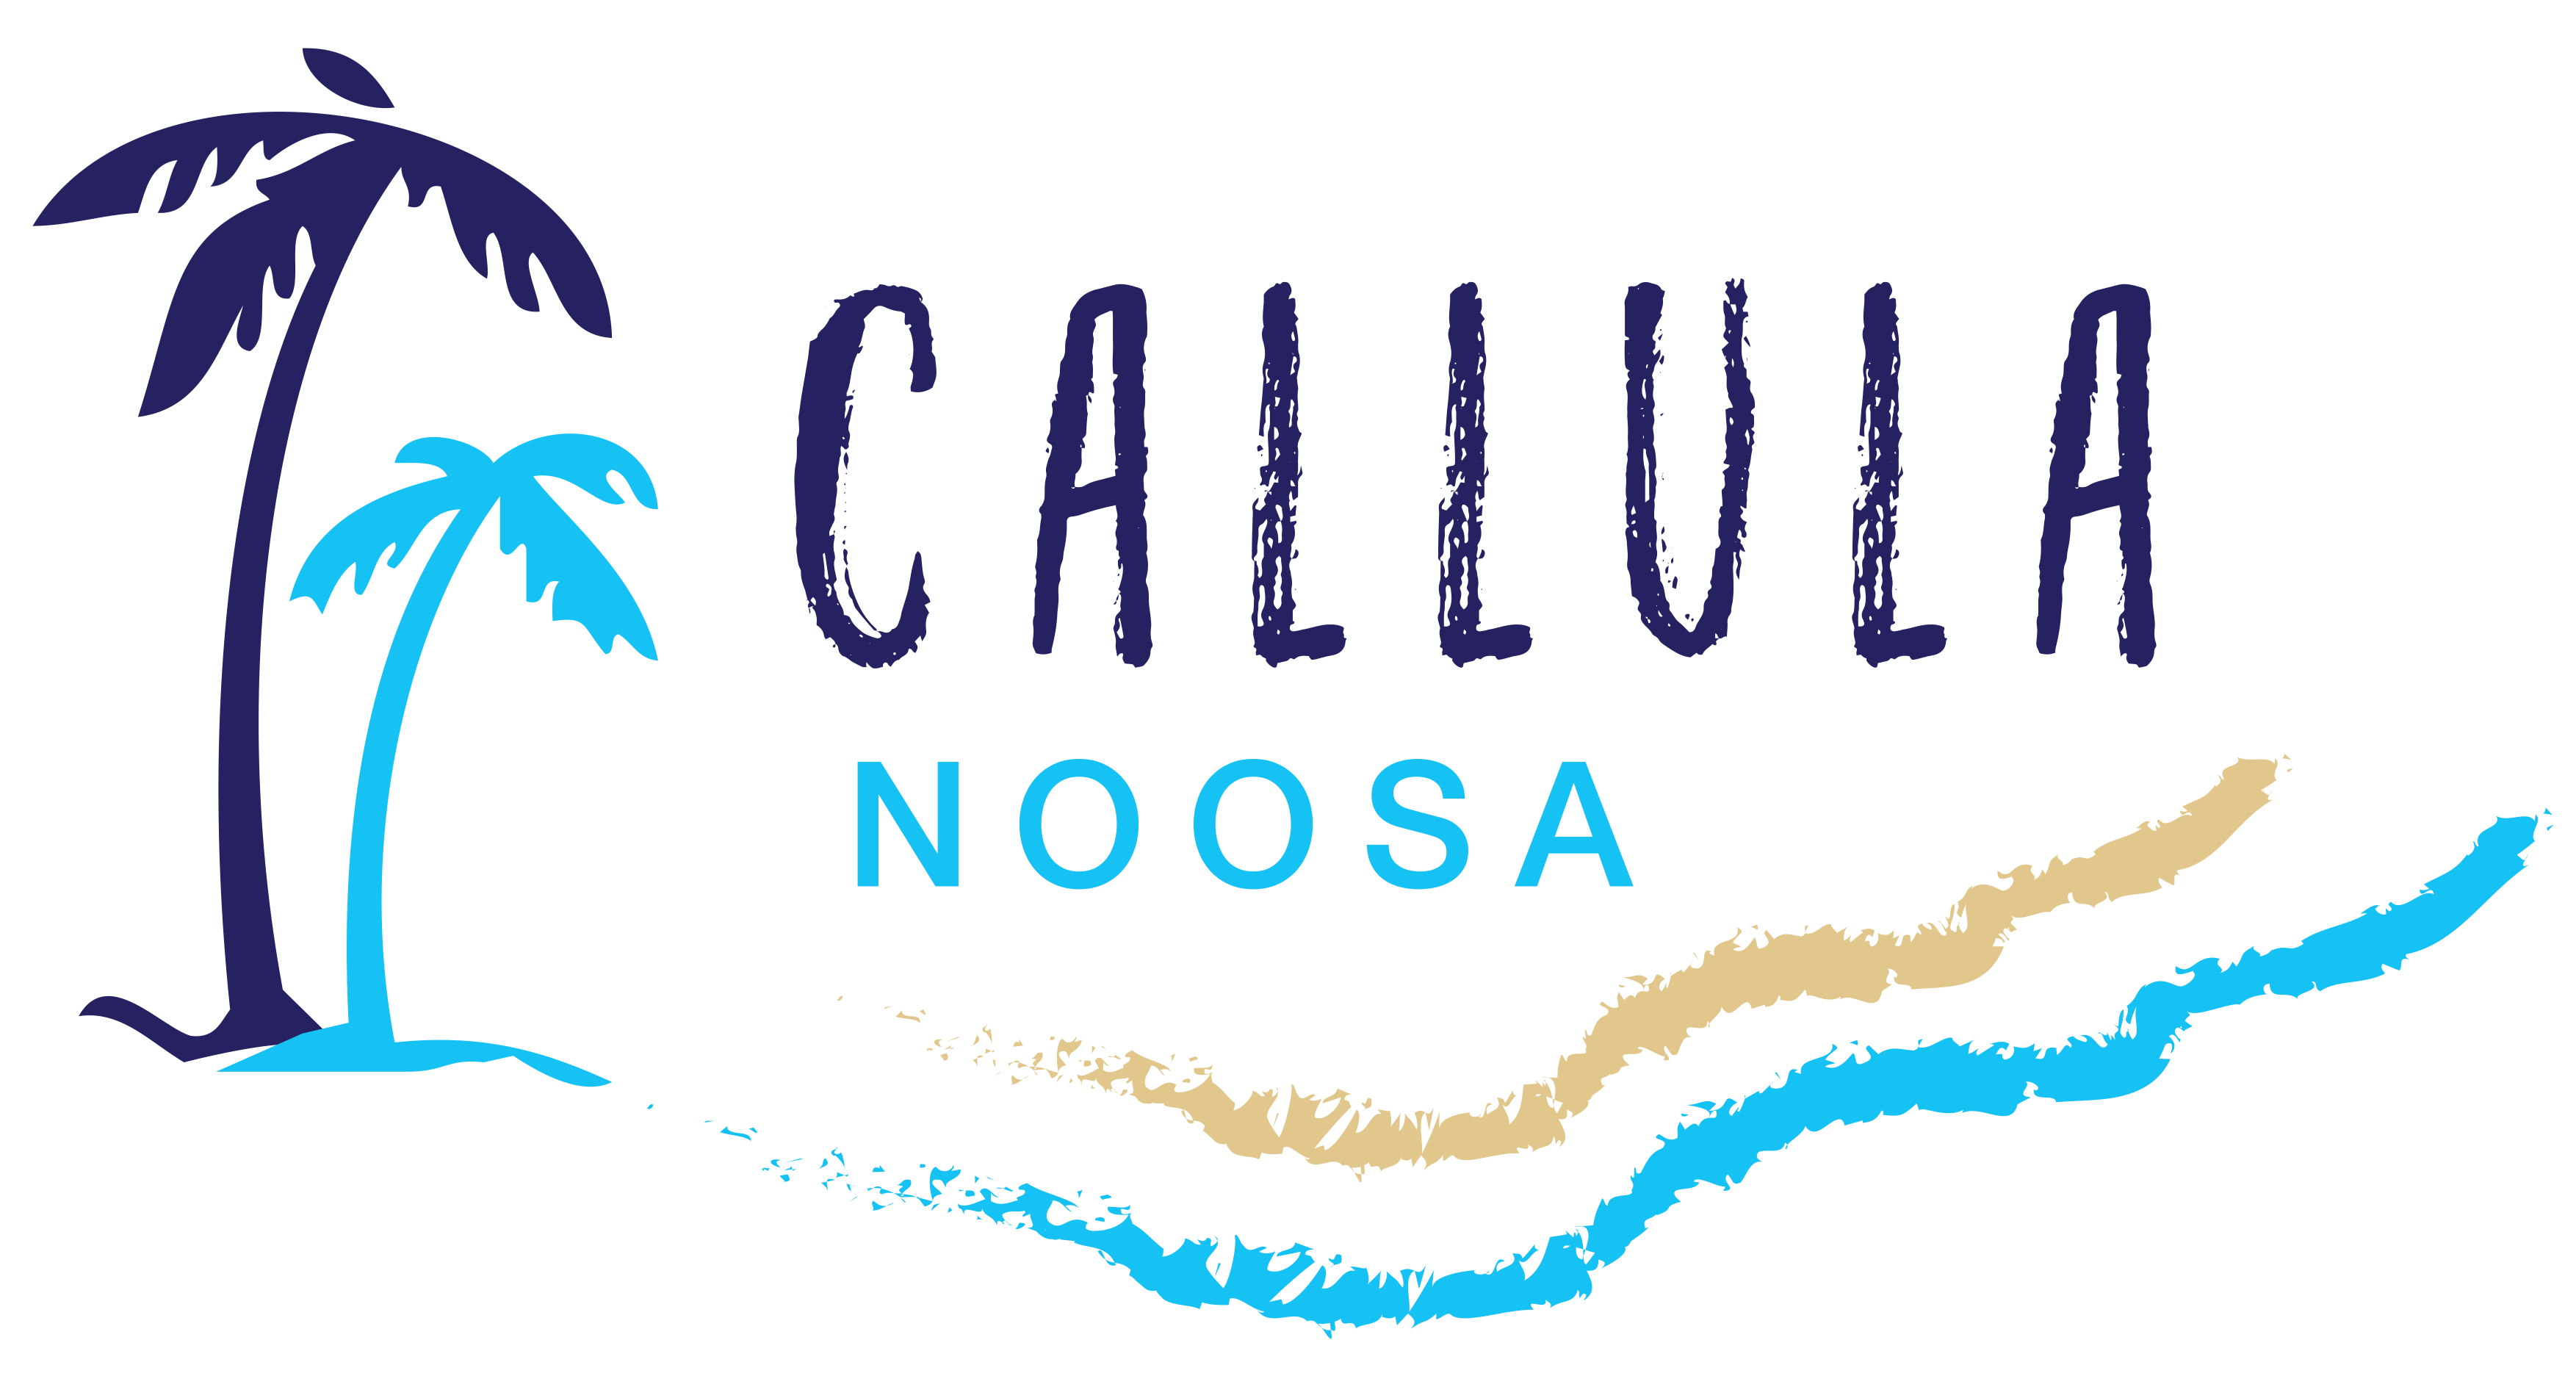 Callula Noosa offers a luxury holiday experience like no other